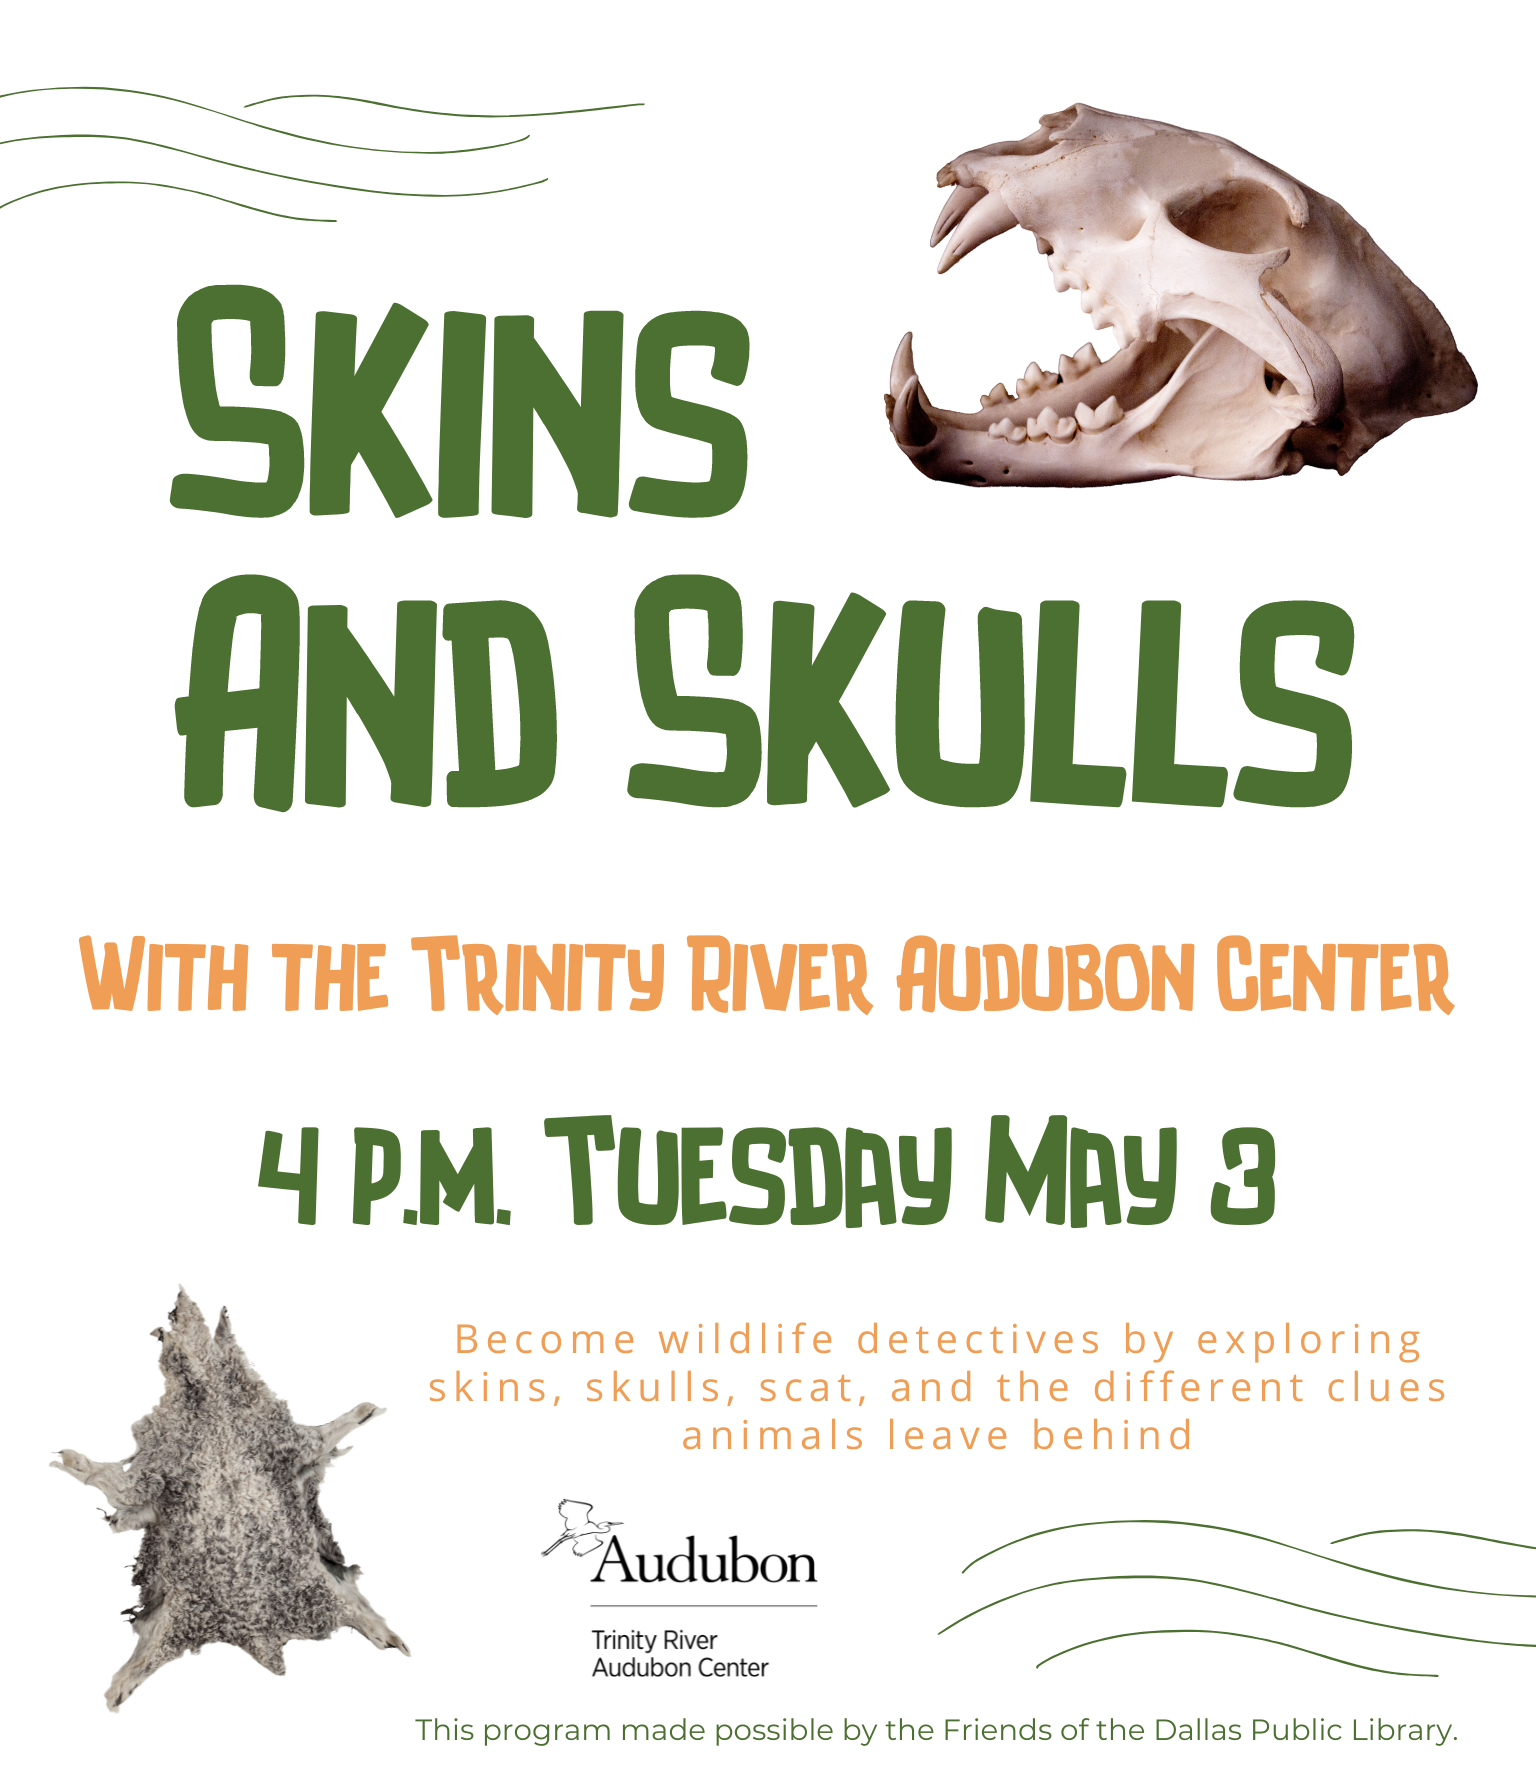 Skins and Skulls with the Trinity River Audubon Center